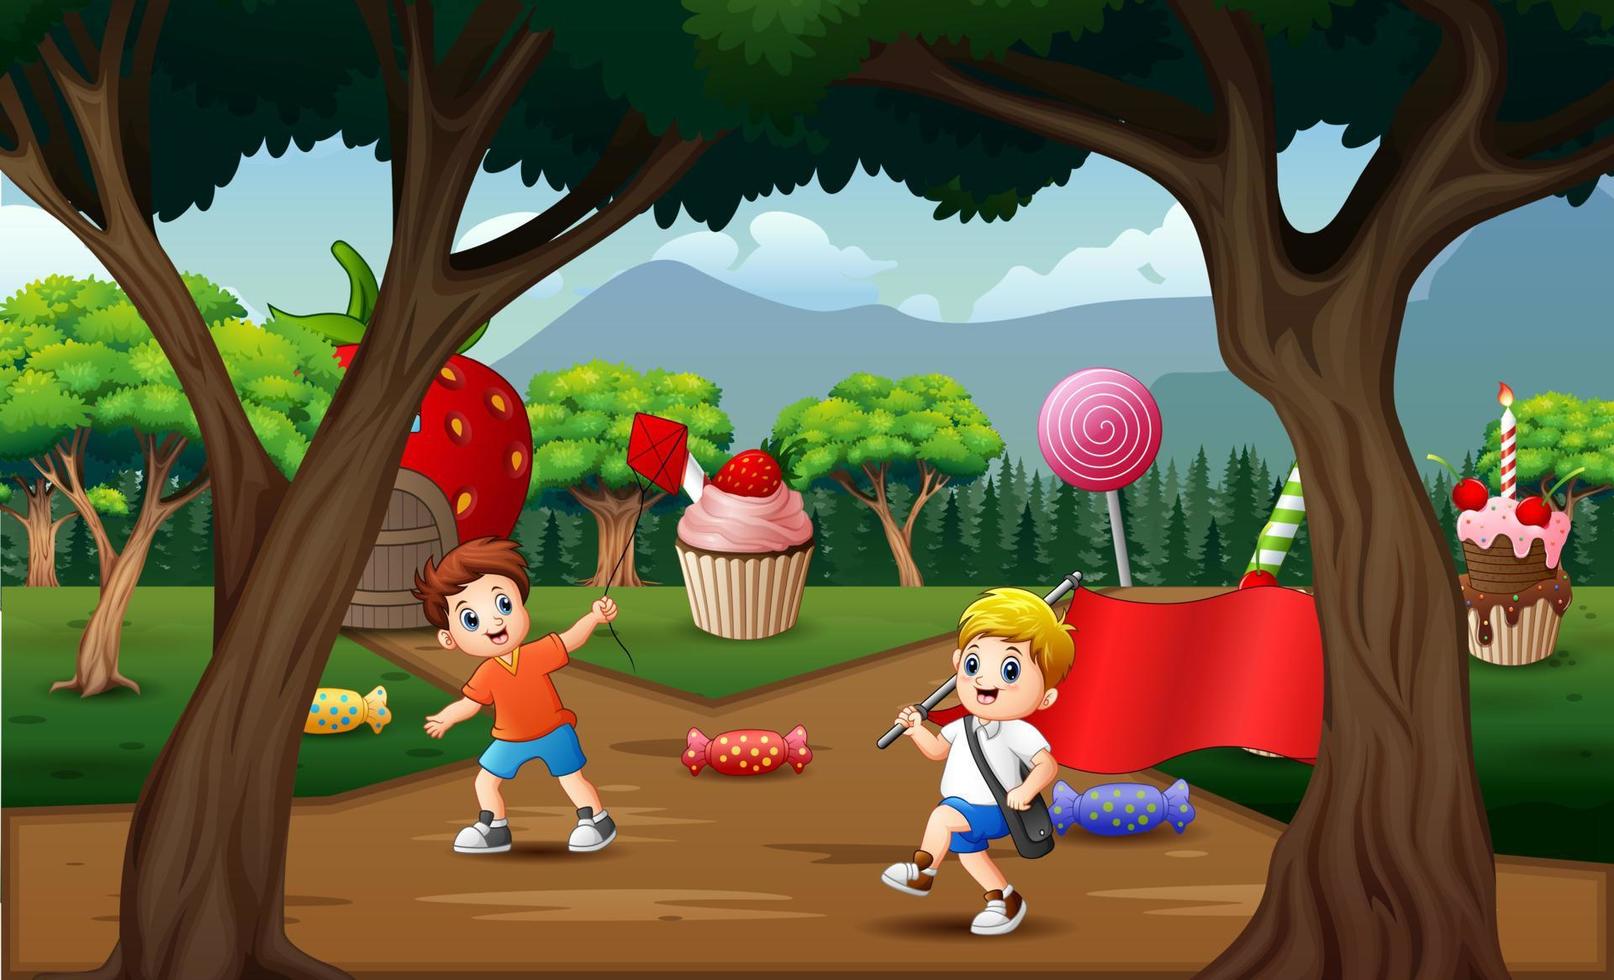 Cartoon children playing in the sweet land vector